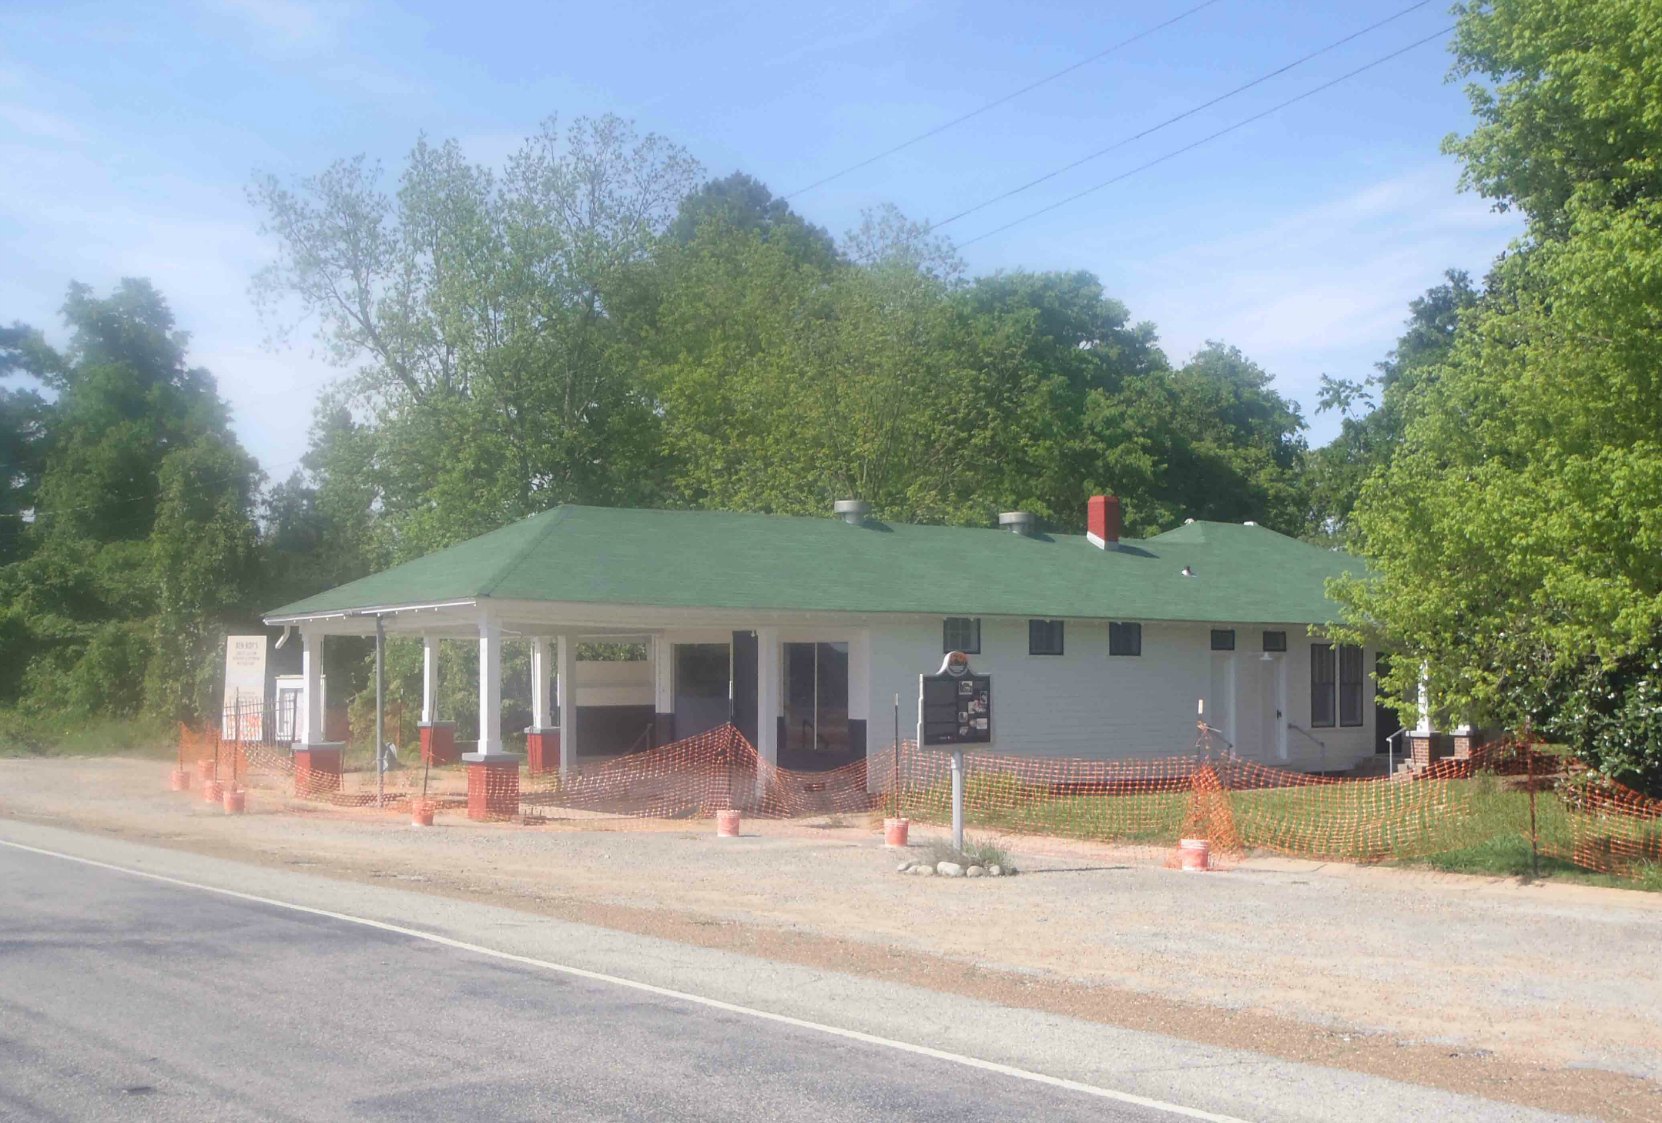 This Gas Station in Money, Mississippi - adjacent to the ruins of Bryant's Grocery - is being restored as a Heritage Building